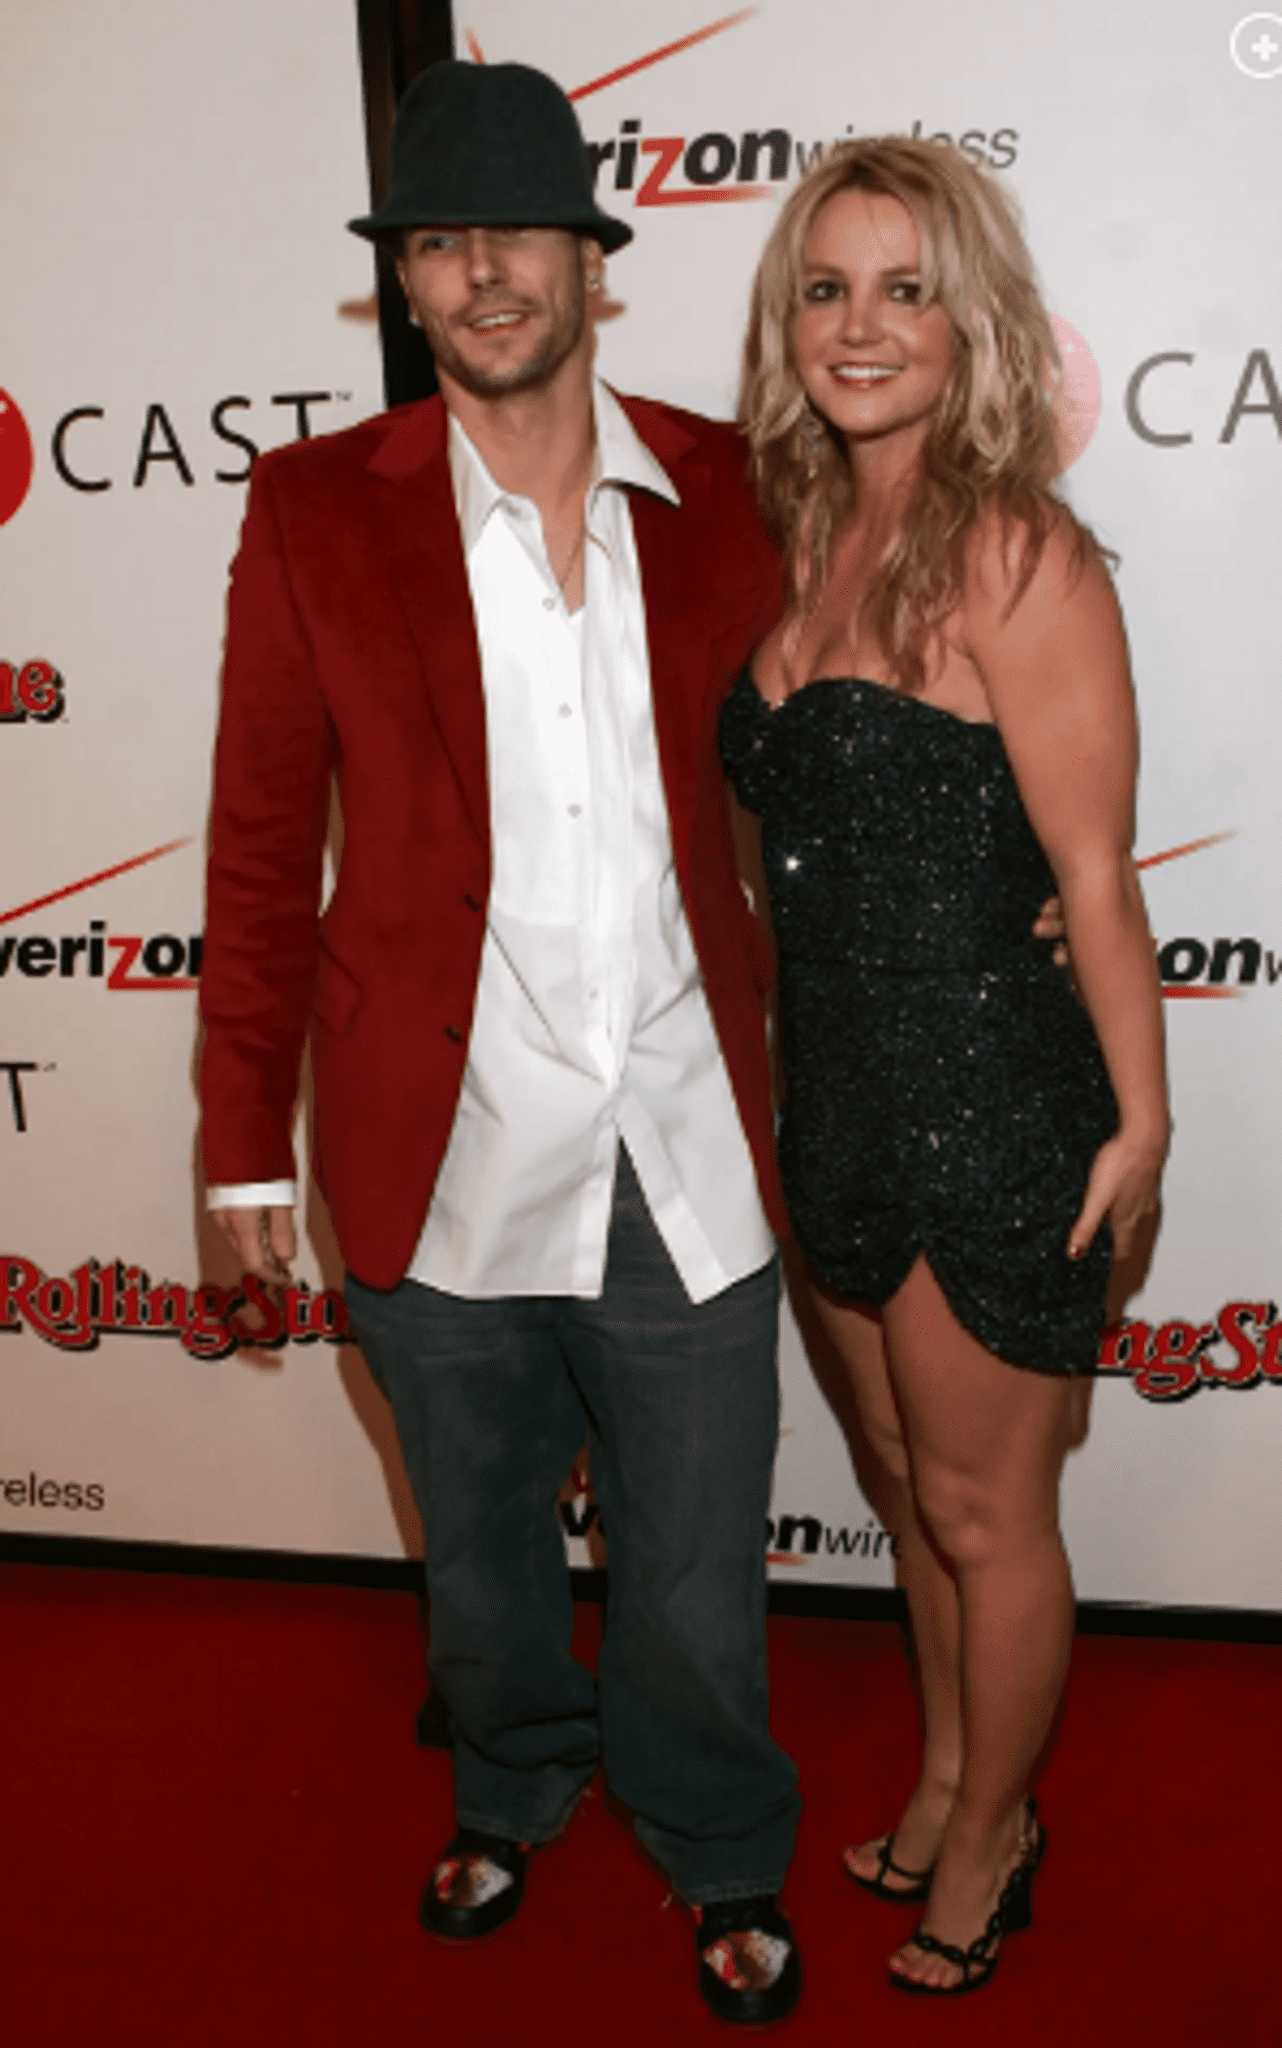 Kevin Federline Claims That His Two Sons And He Are Worried About Britney Spears' Mental State